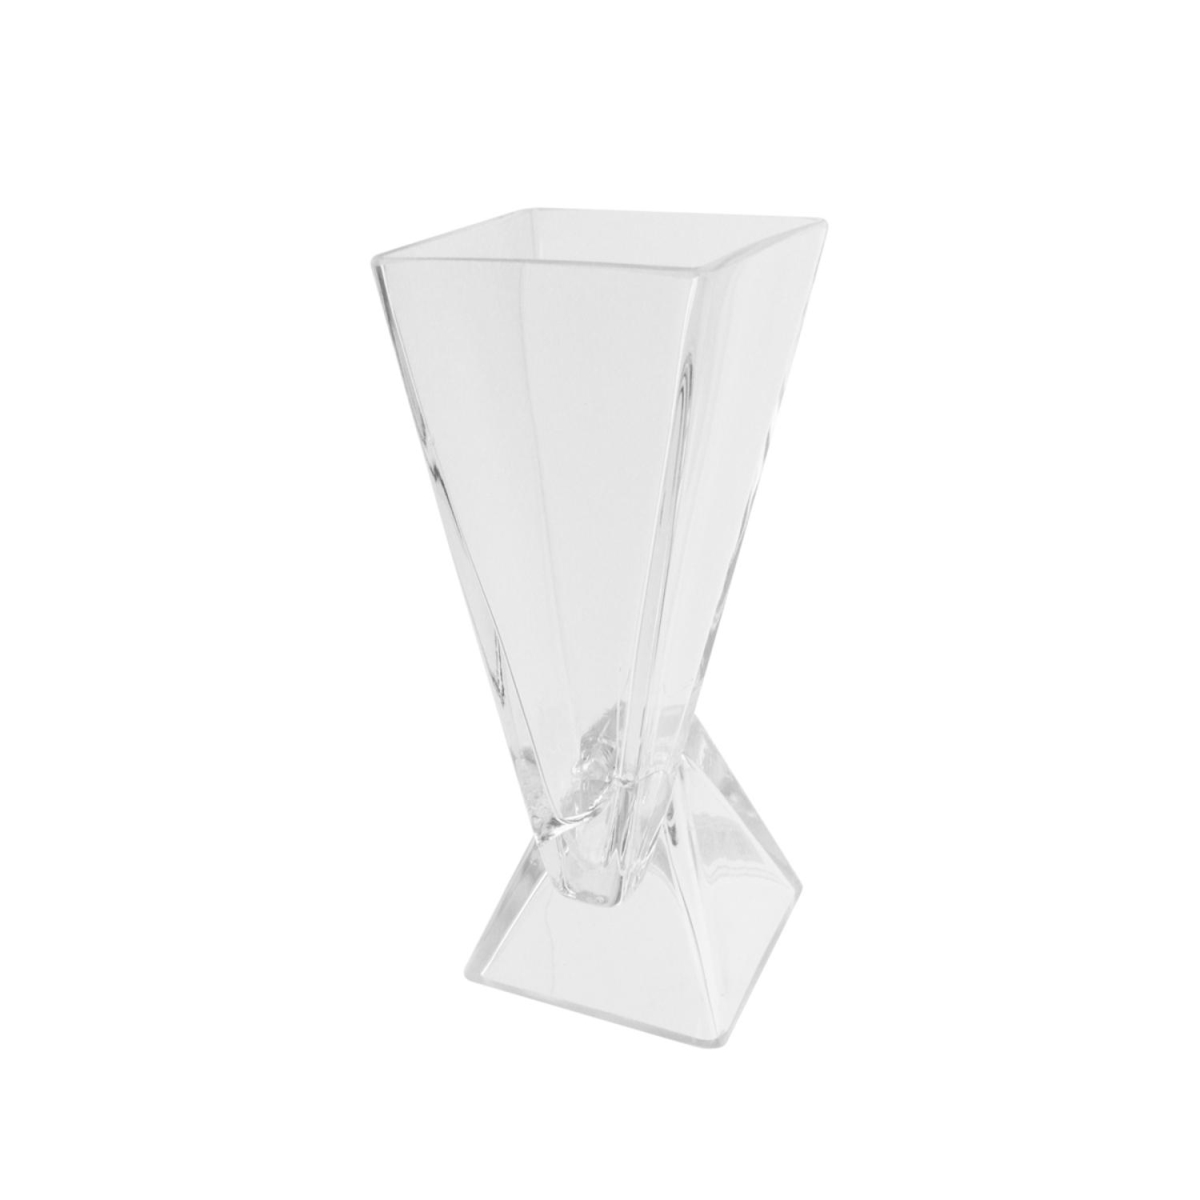 32234681 9.75 In. Offset Pyramids Abstract Transparent Glass Vase